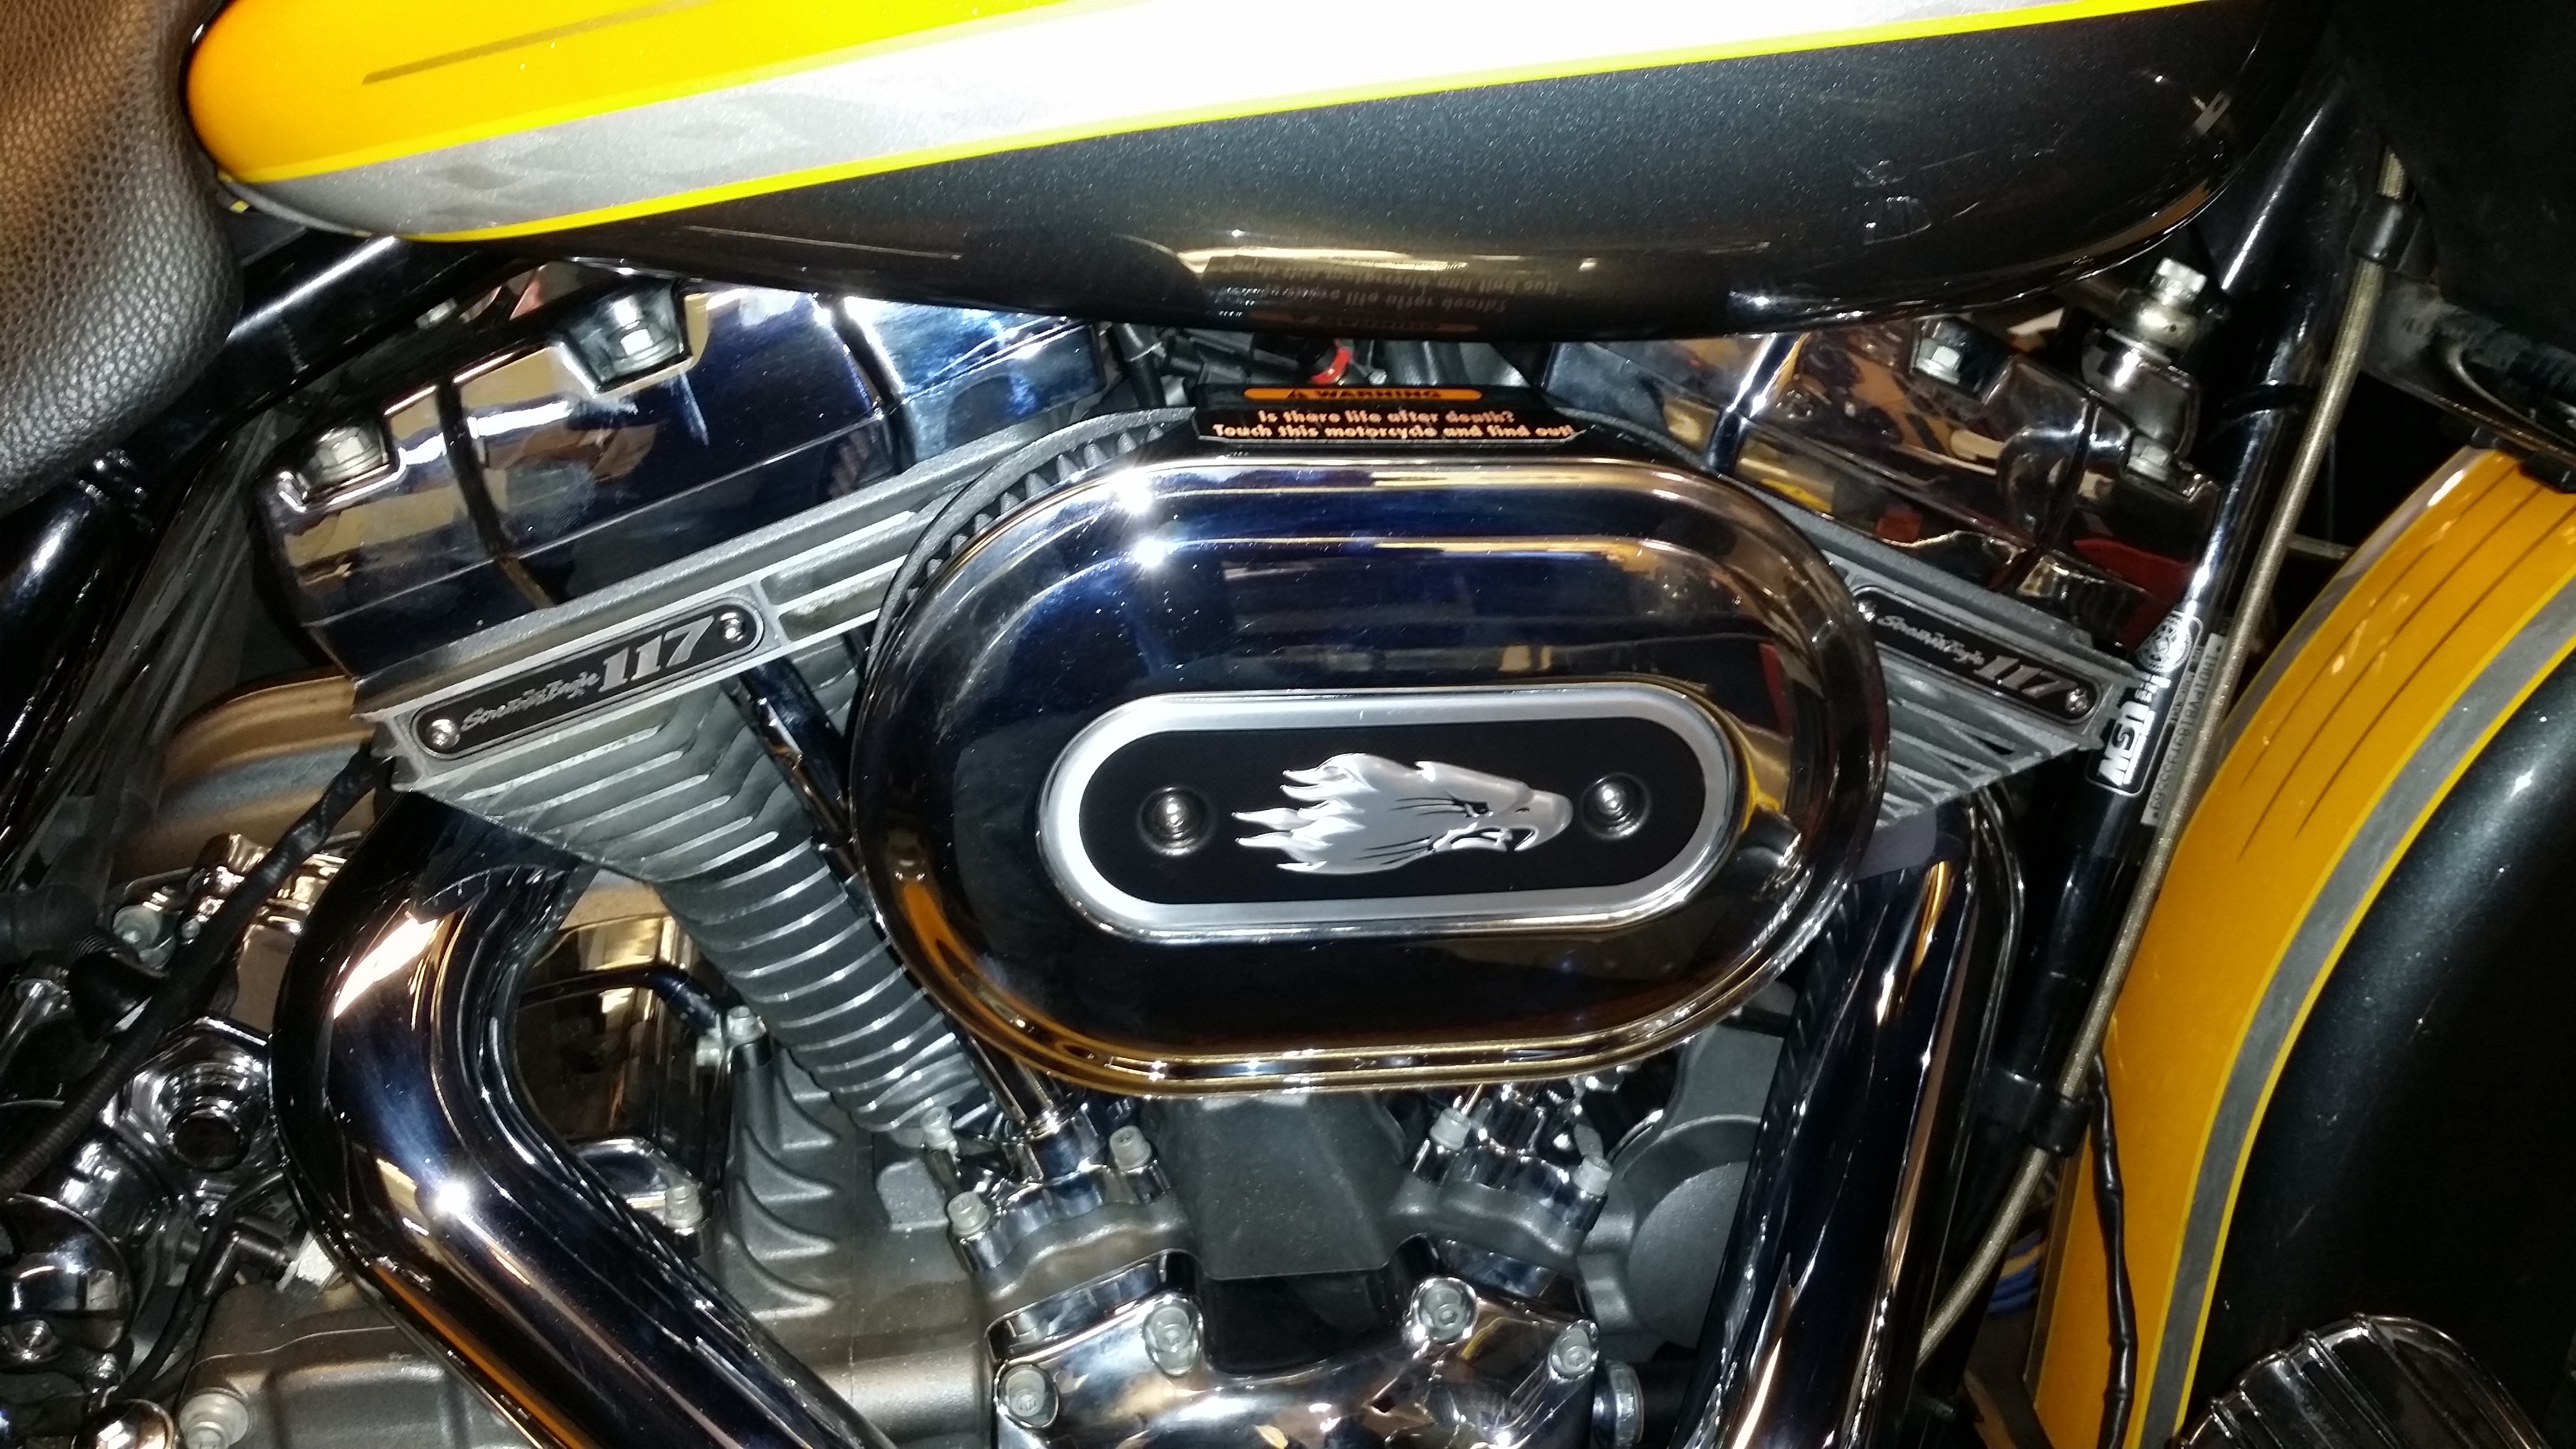 117 Hd Kit Fitment Page 2 Harley Davidson Forums